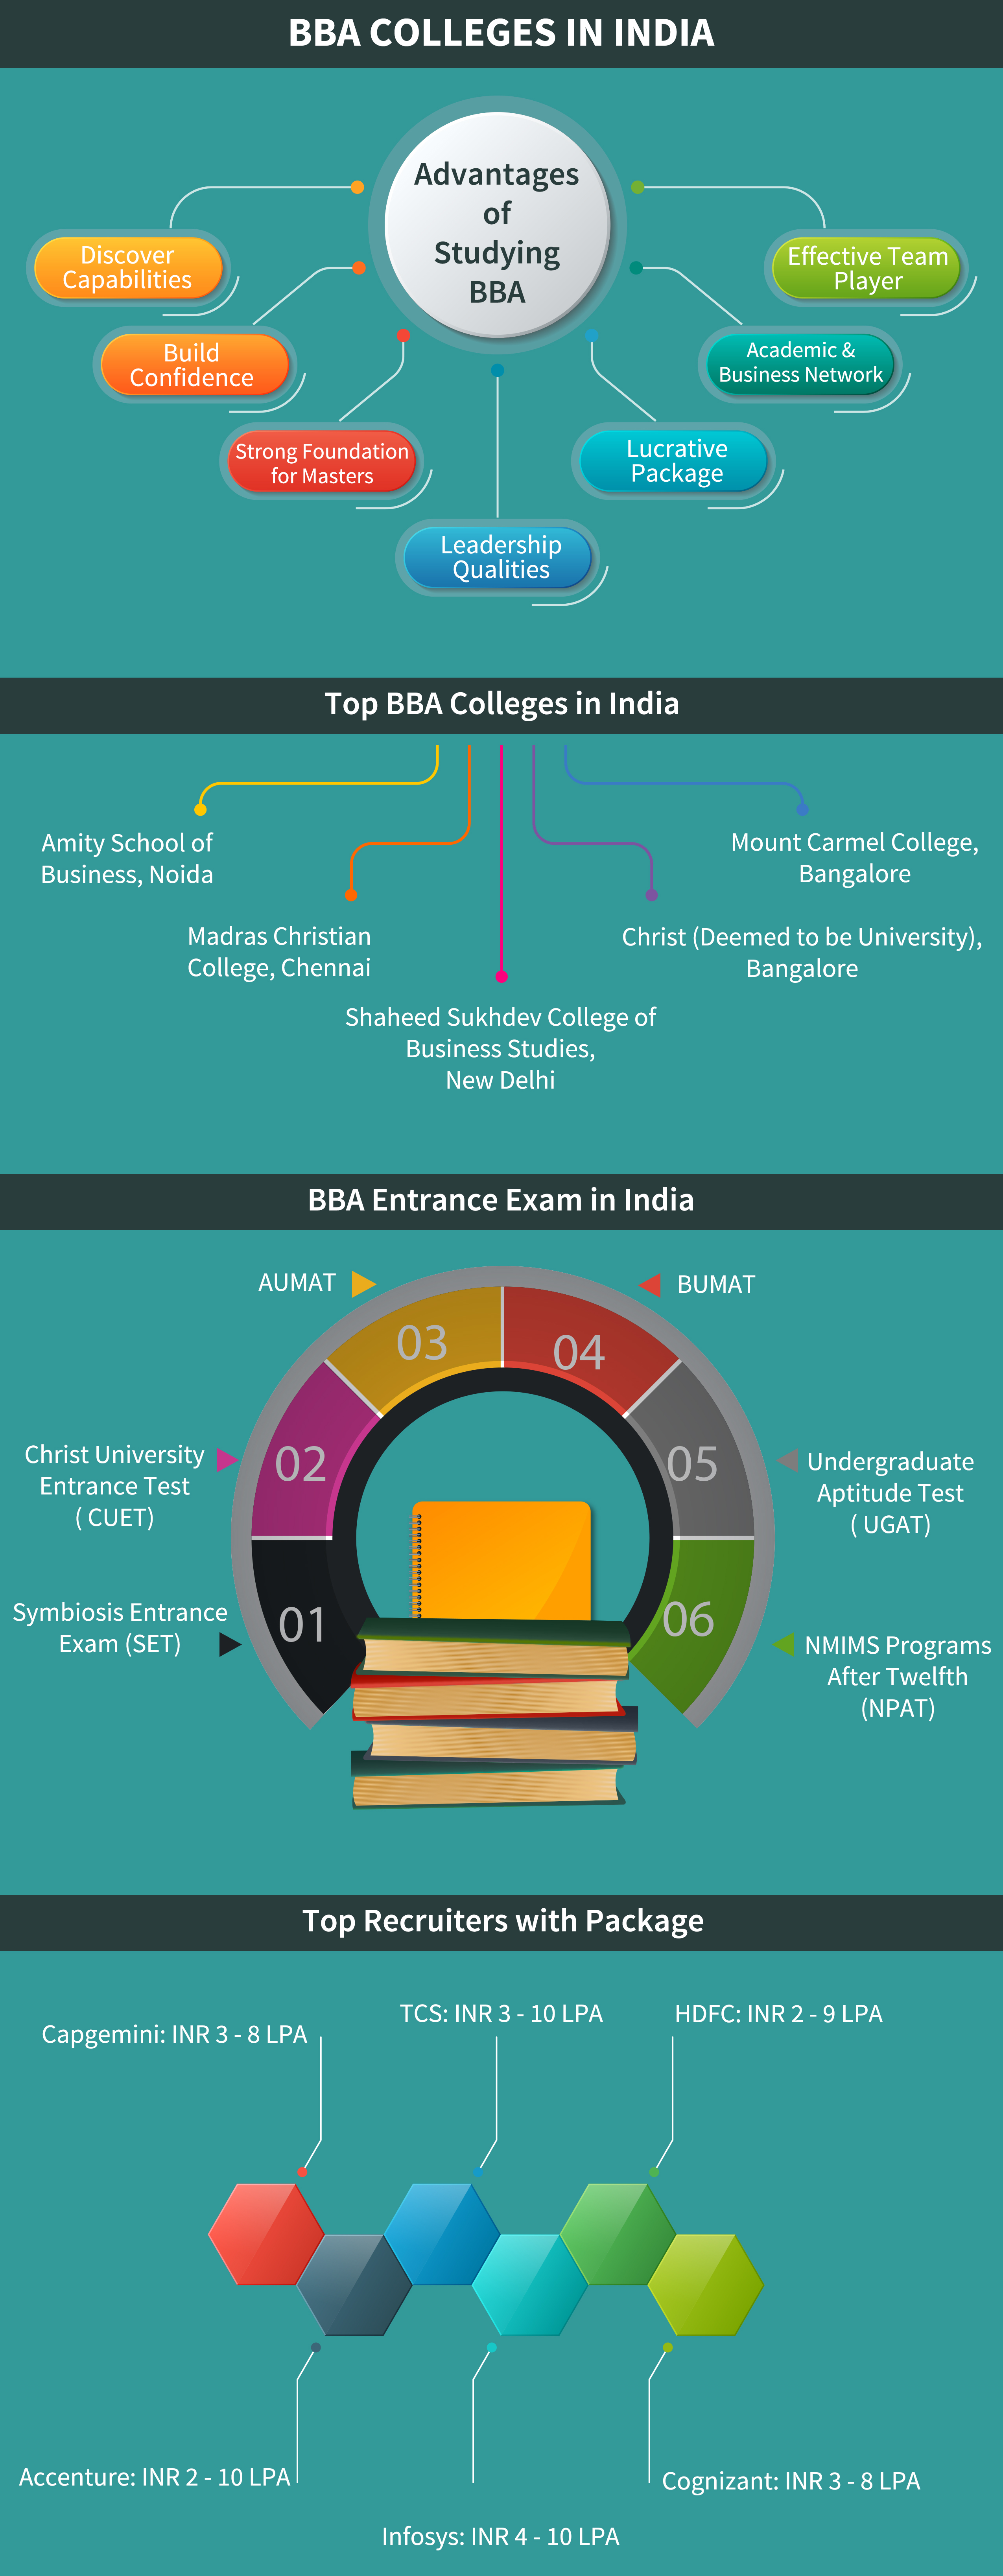 BBA Colleges in India